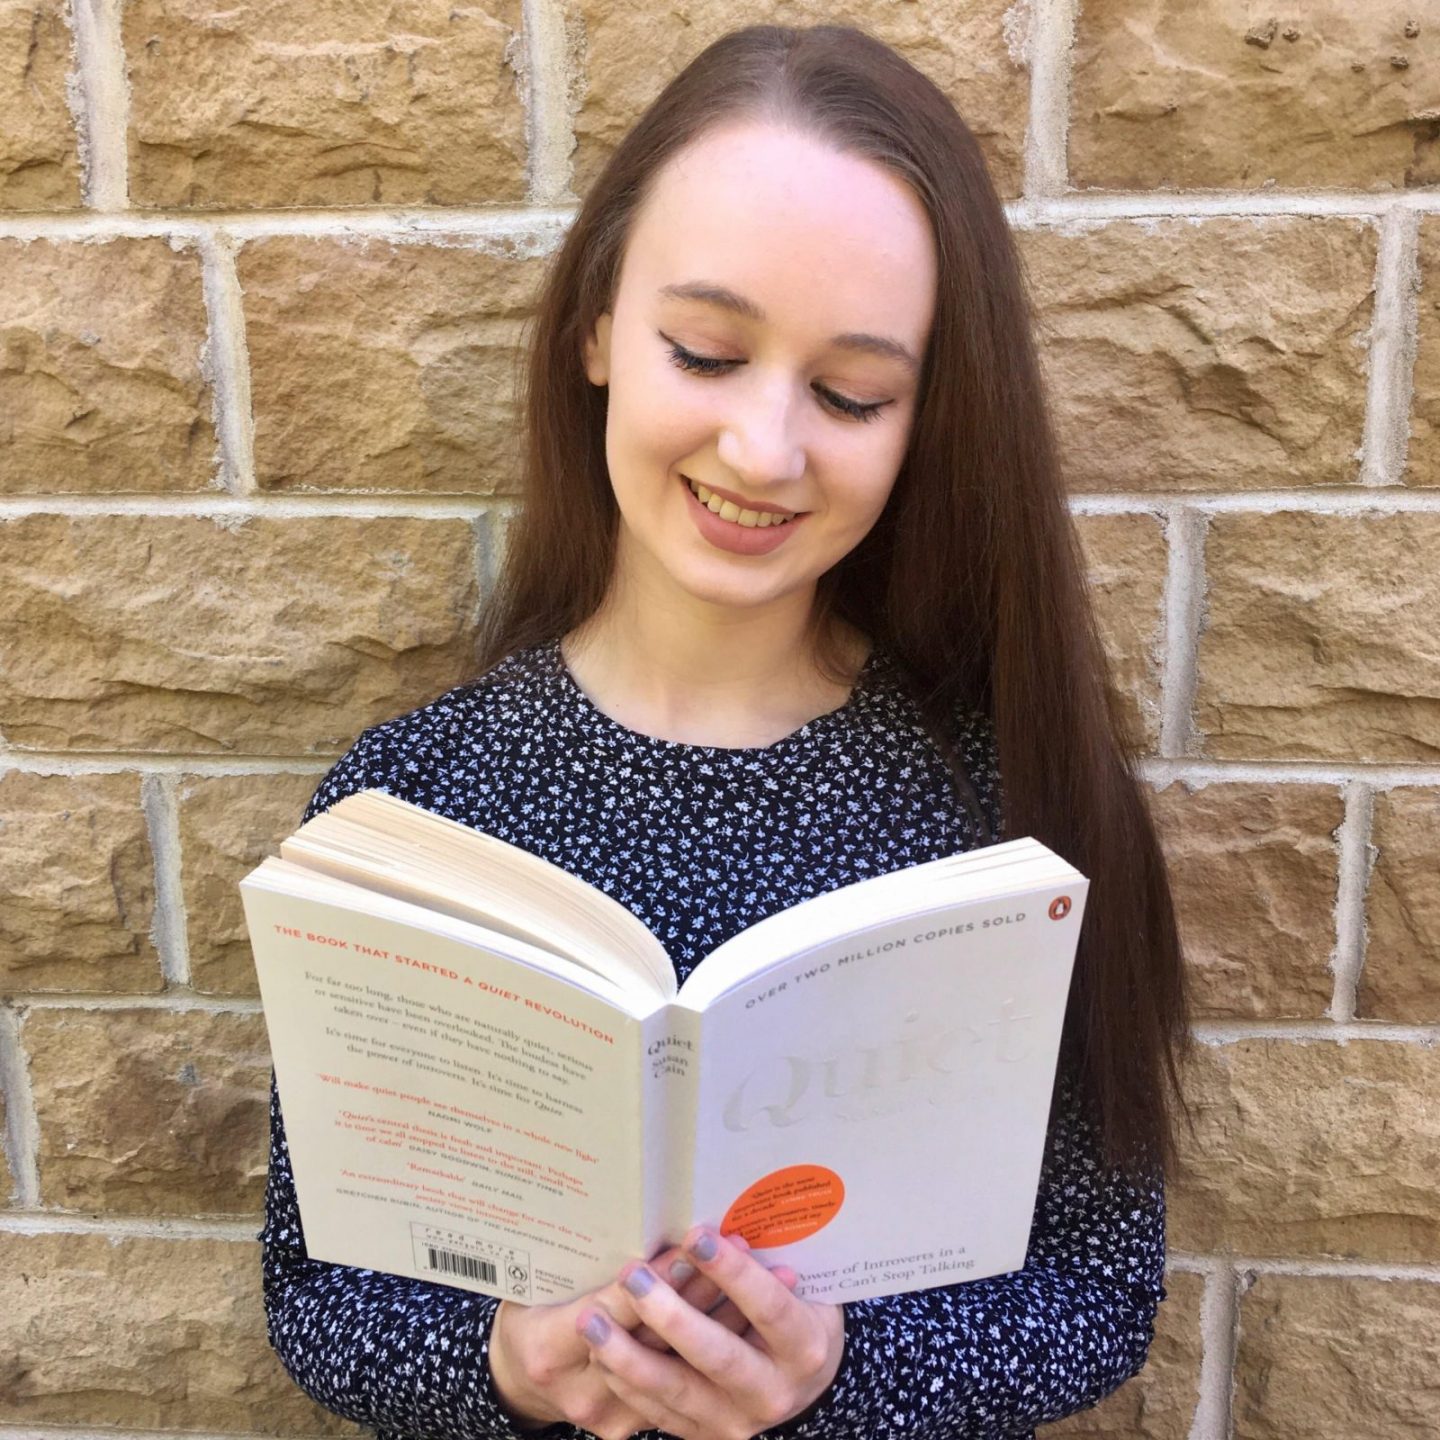 headshot of pippa outdoors in front of brick wall, hair down and wearing dark blue spotted dress, looking down at open book and smiling. book is 'quiet' by susan cain, plain white cover